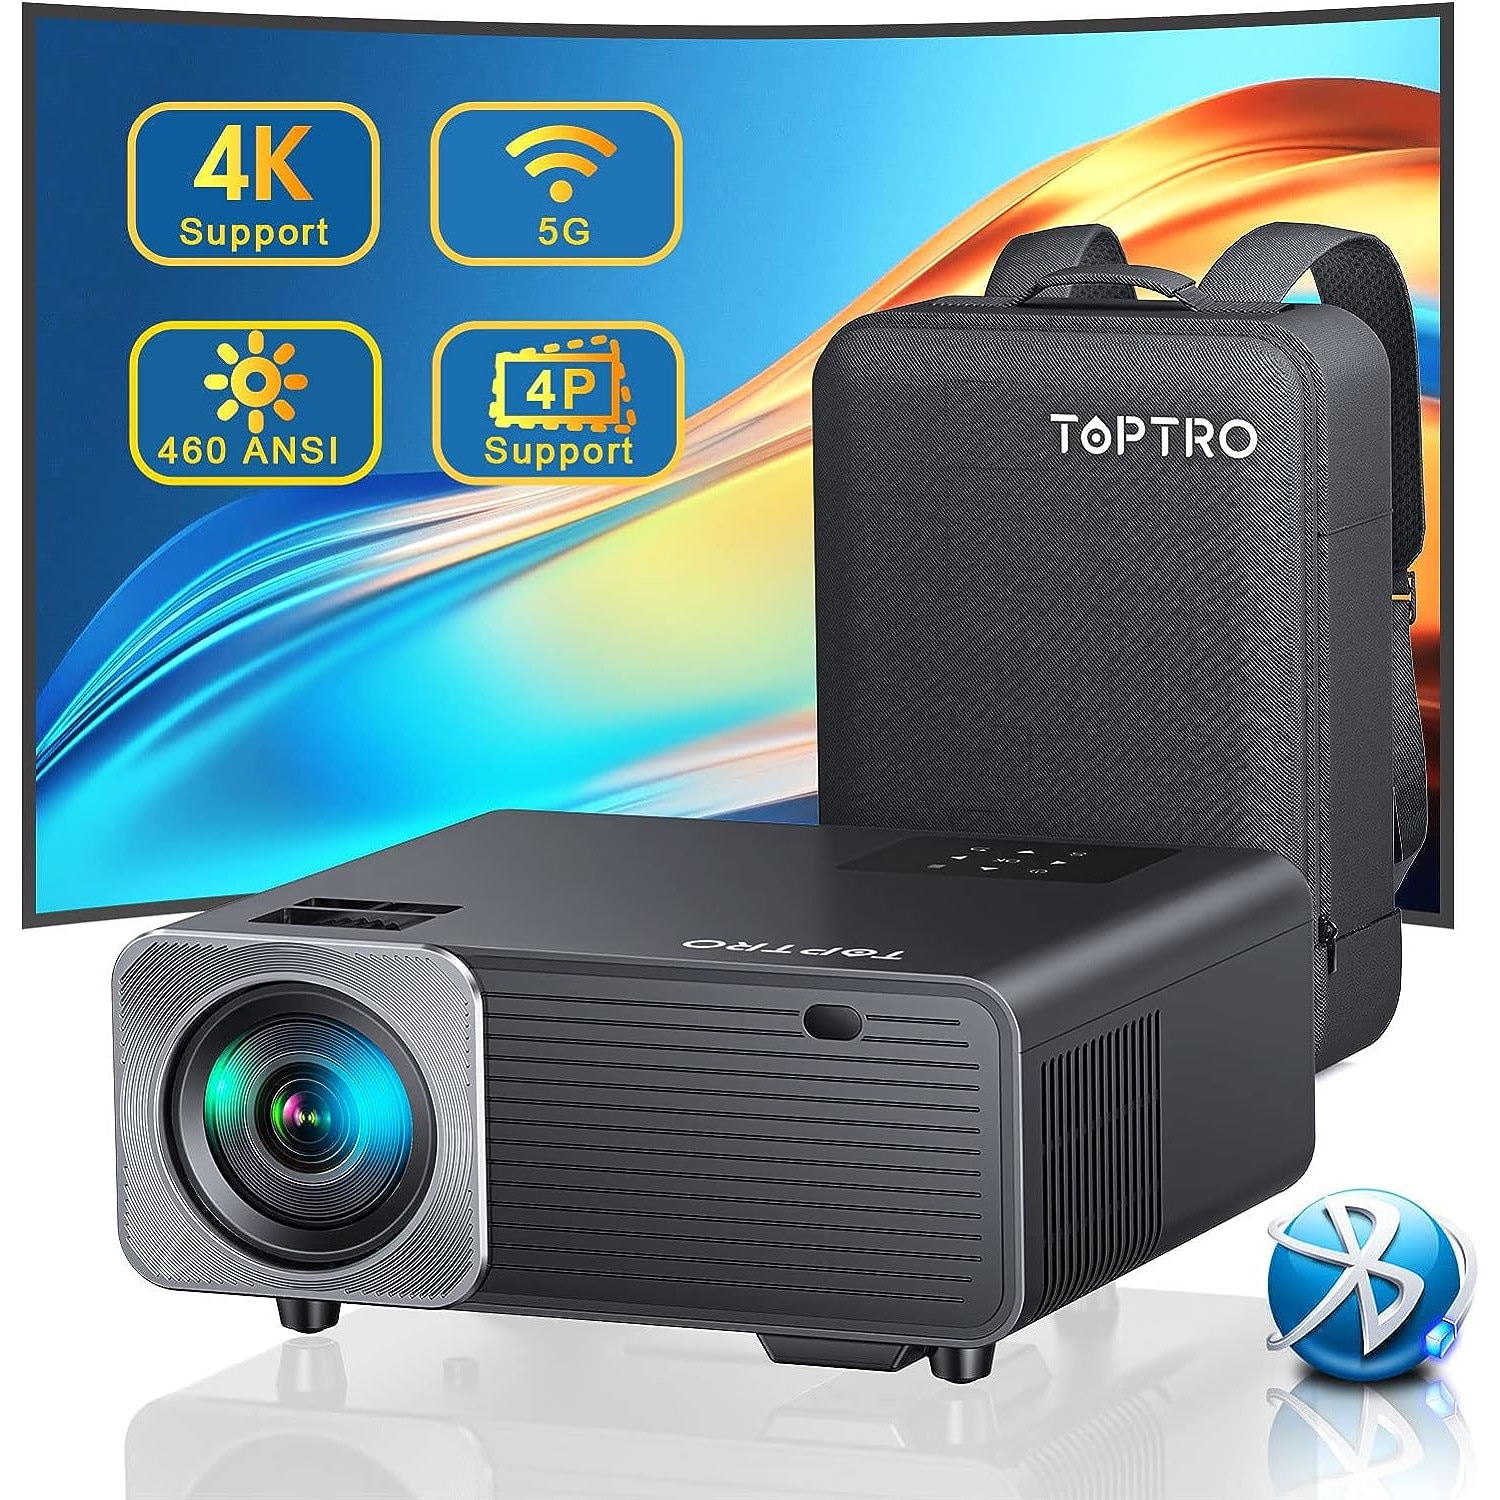 Auto Focus & Keystone】Projector, 20000 Lumen WiFi 6 Bluetooth Full HD 1080P  Portable Projector Supported 4K, 4D/4P Keystone 50% Zoom 300 Display Home  Cinema Projector for Smartphone/TV Stick/PPT/PS5: : Electronics  & Photo